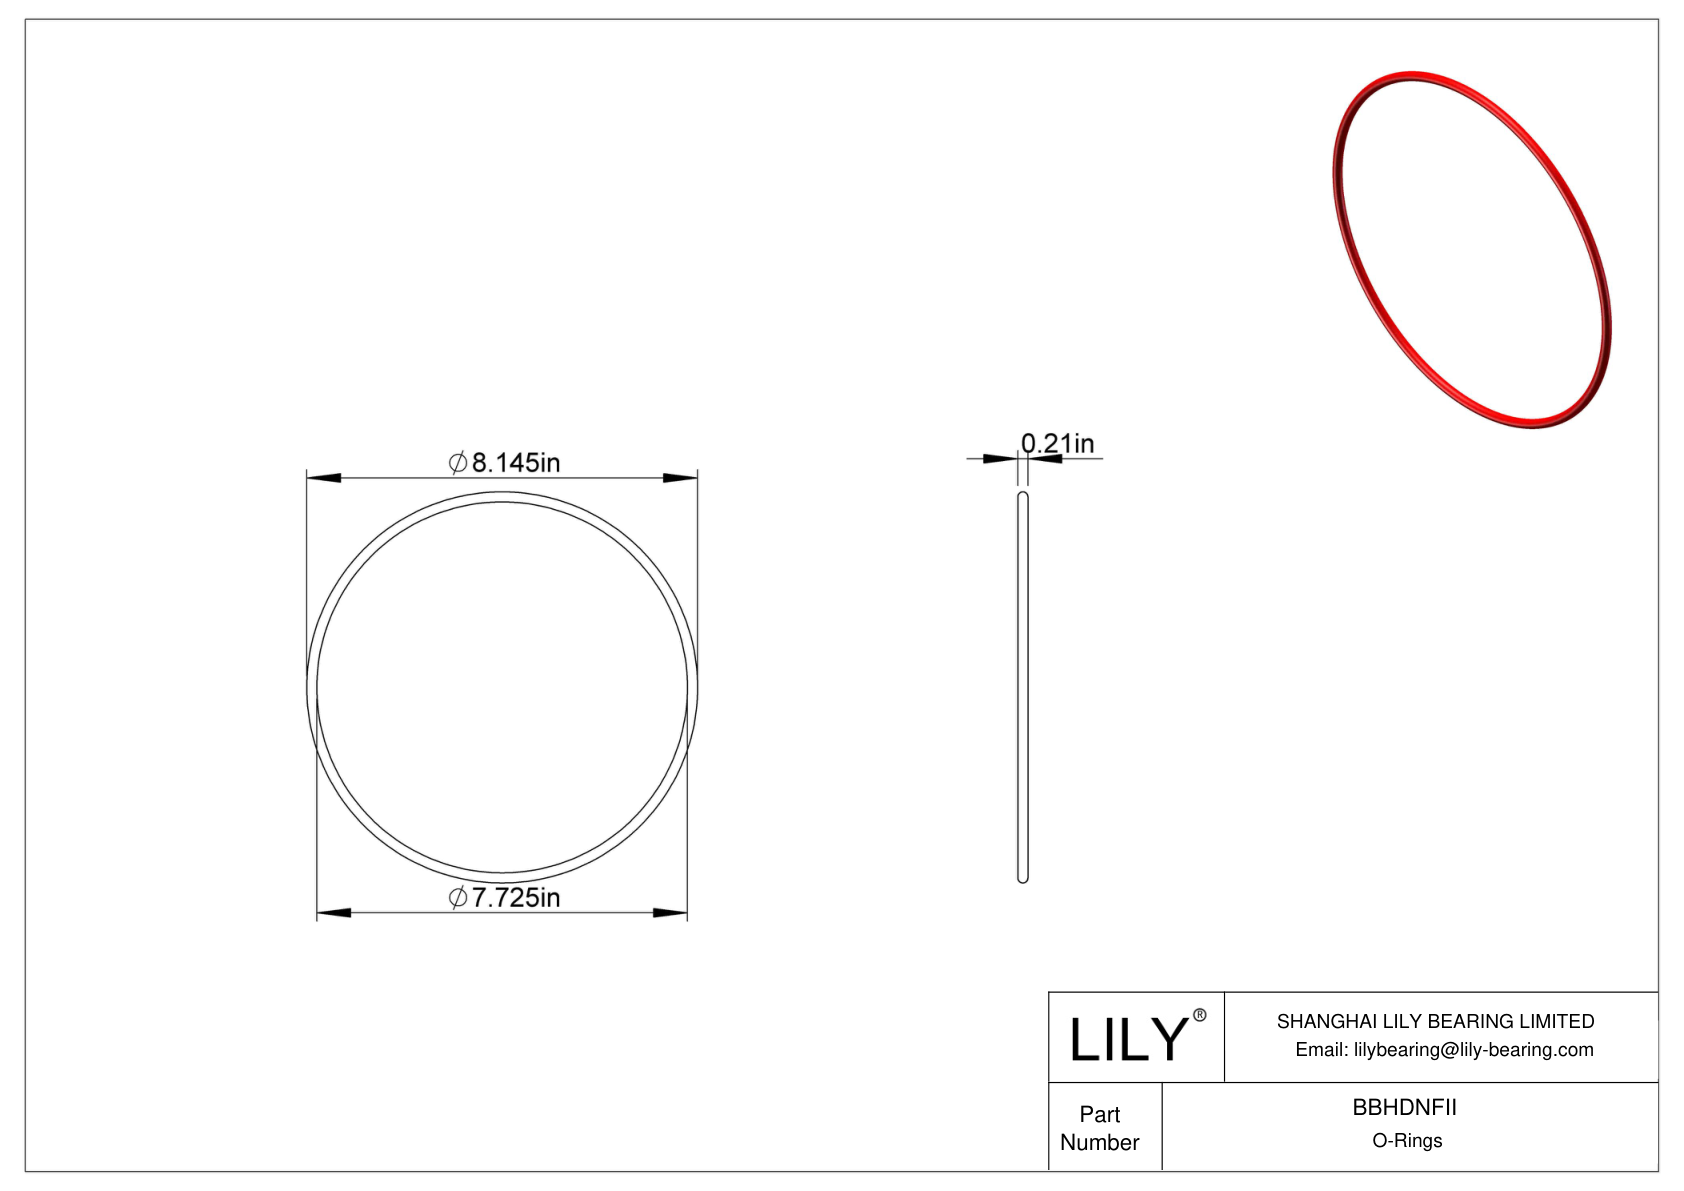 BBHDNFII High Temperature O-Rings Round cad drawing